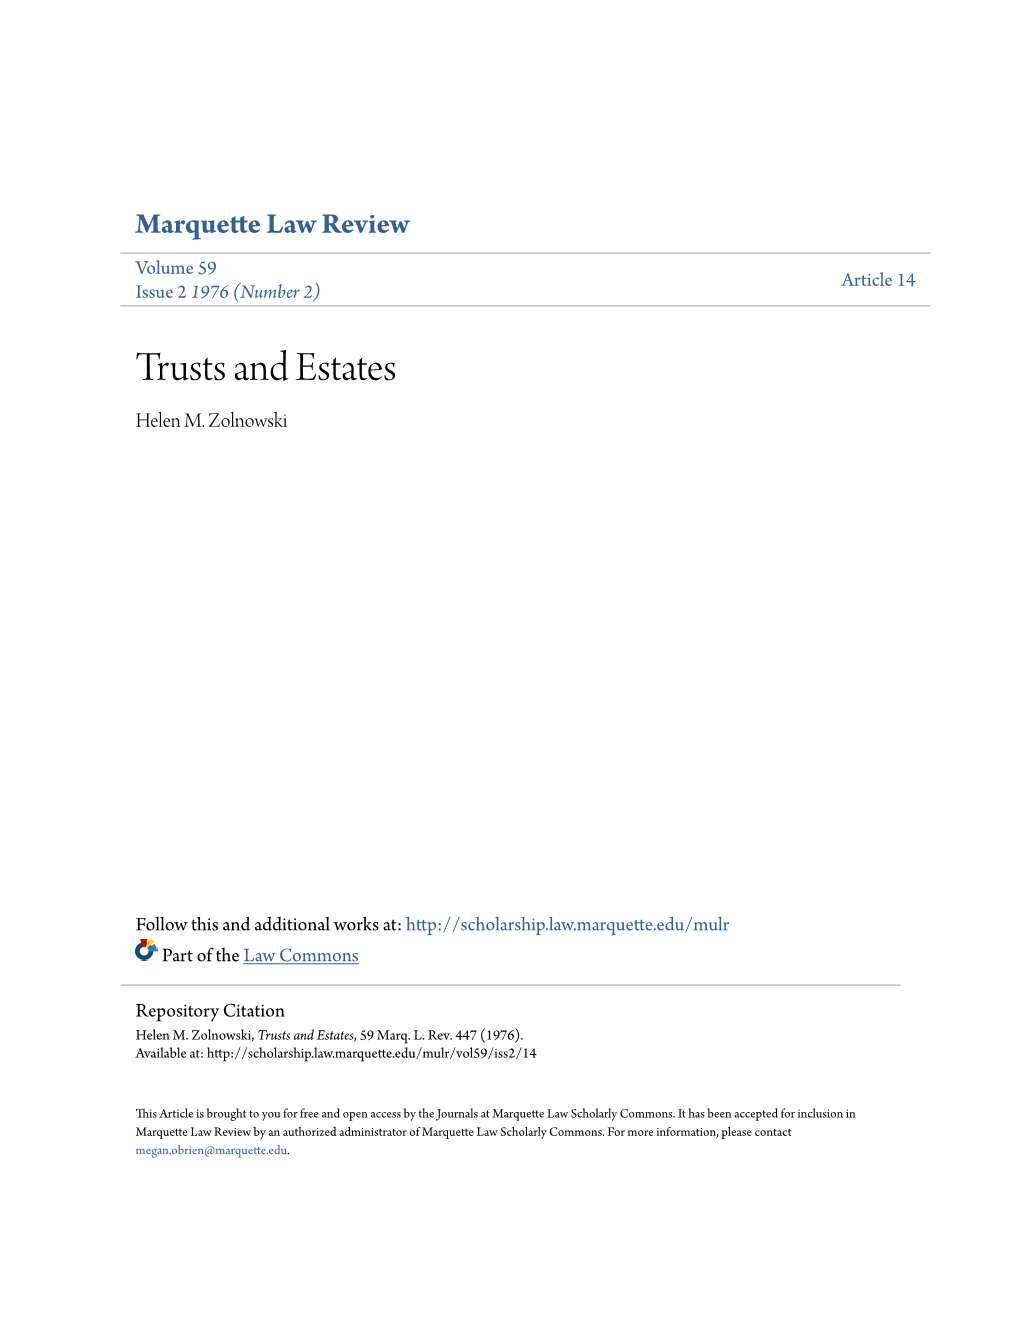 Trusts and Estates Helen M